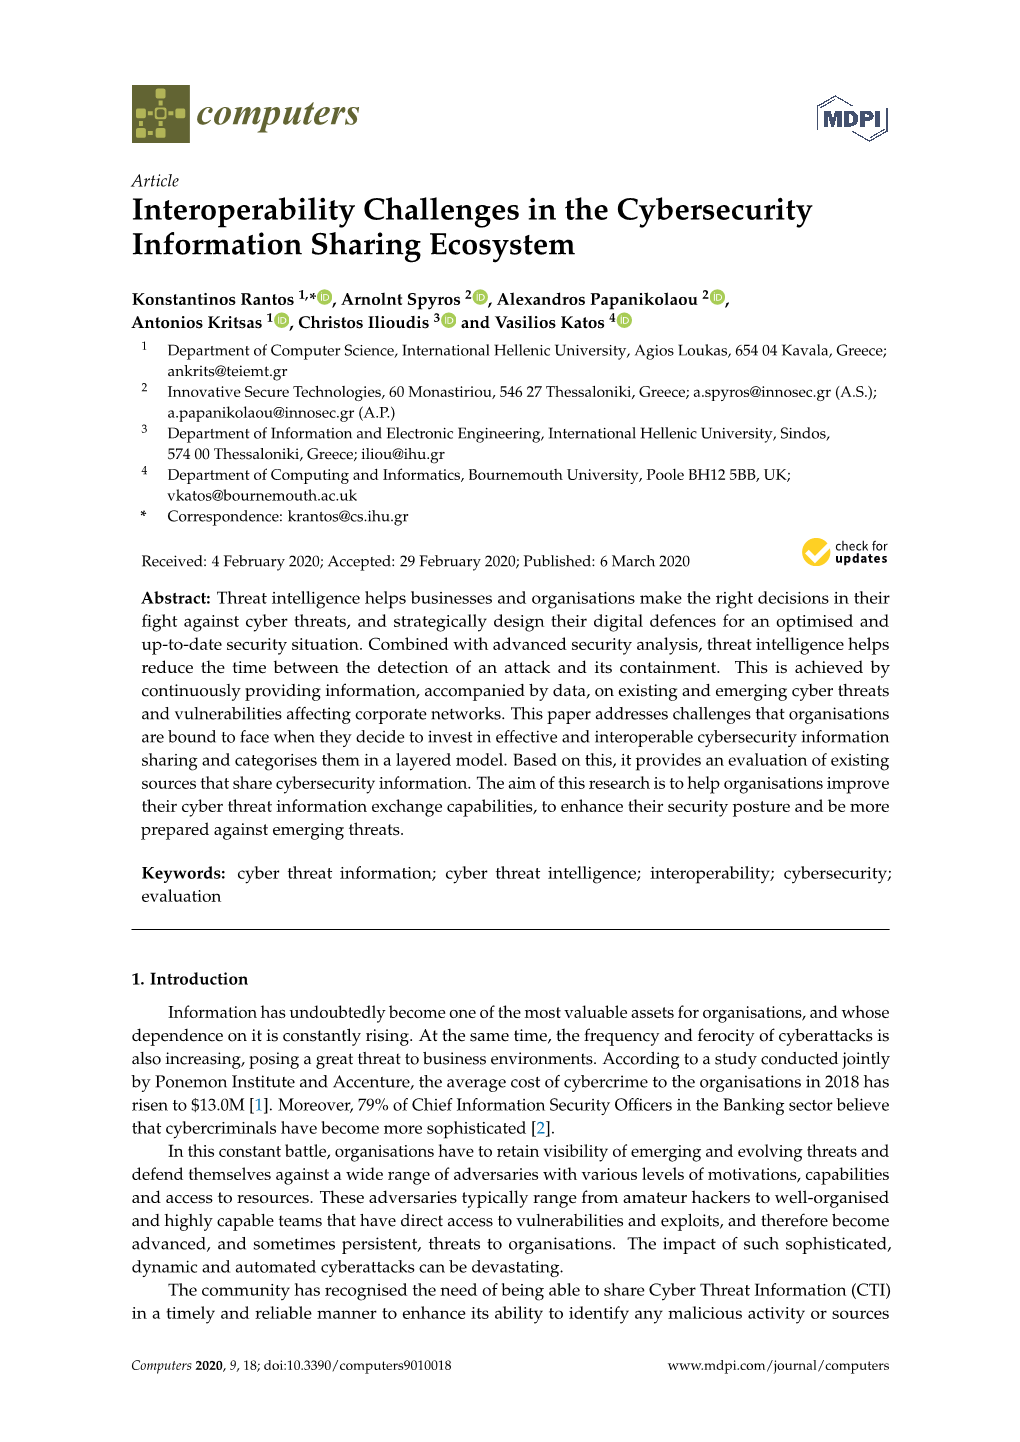 Interoperability Challenges in the Cybersecurity Information Sharing Ecosystem